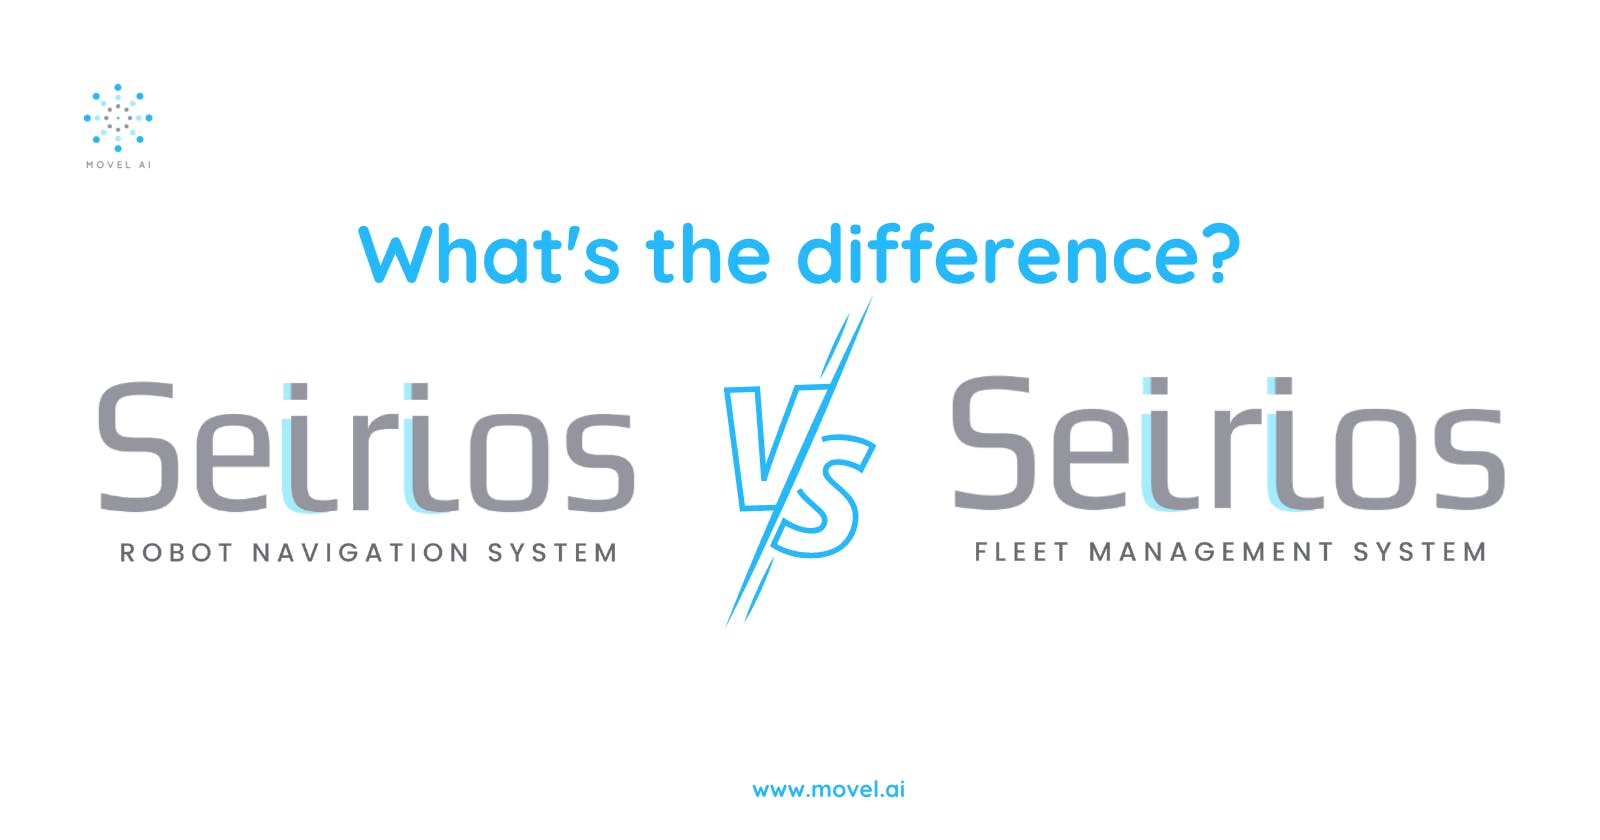 What is the Difference between Seirios RNS and Seirios FMS?